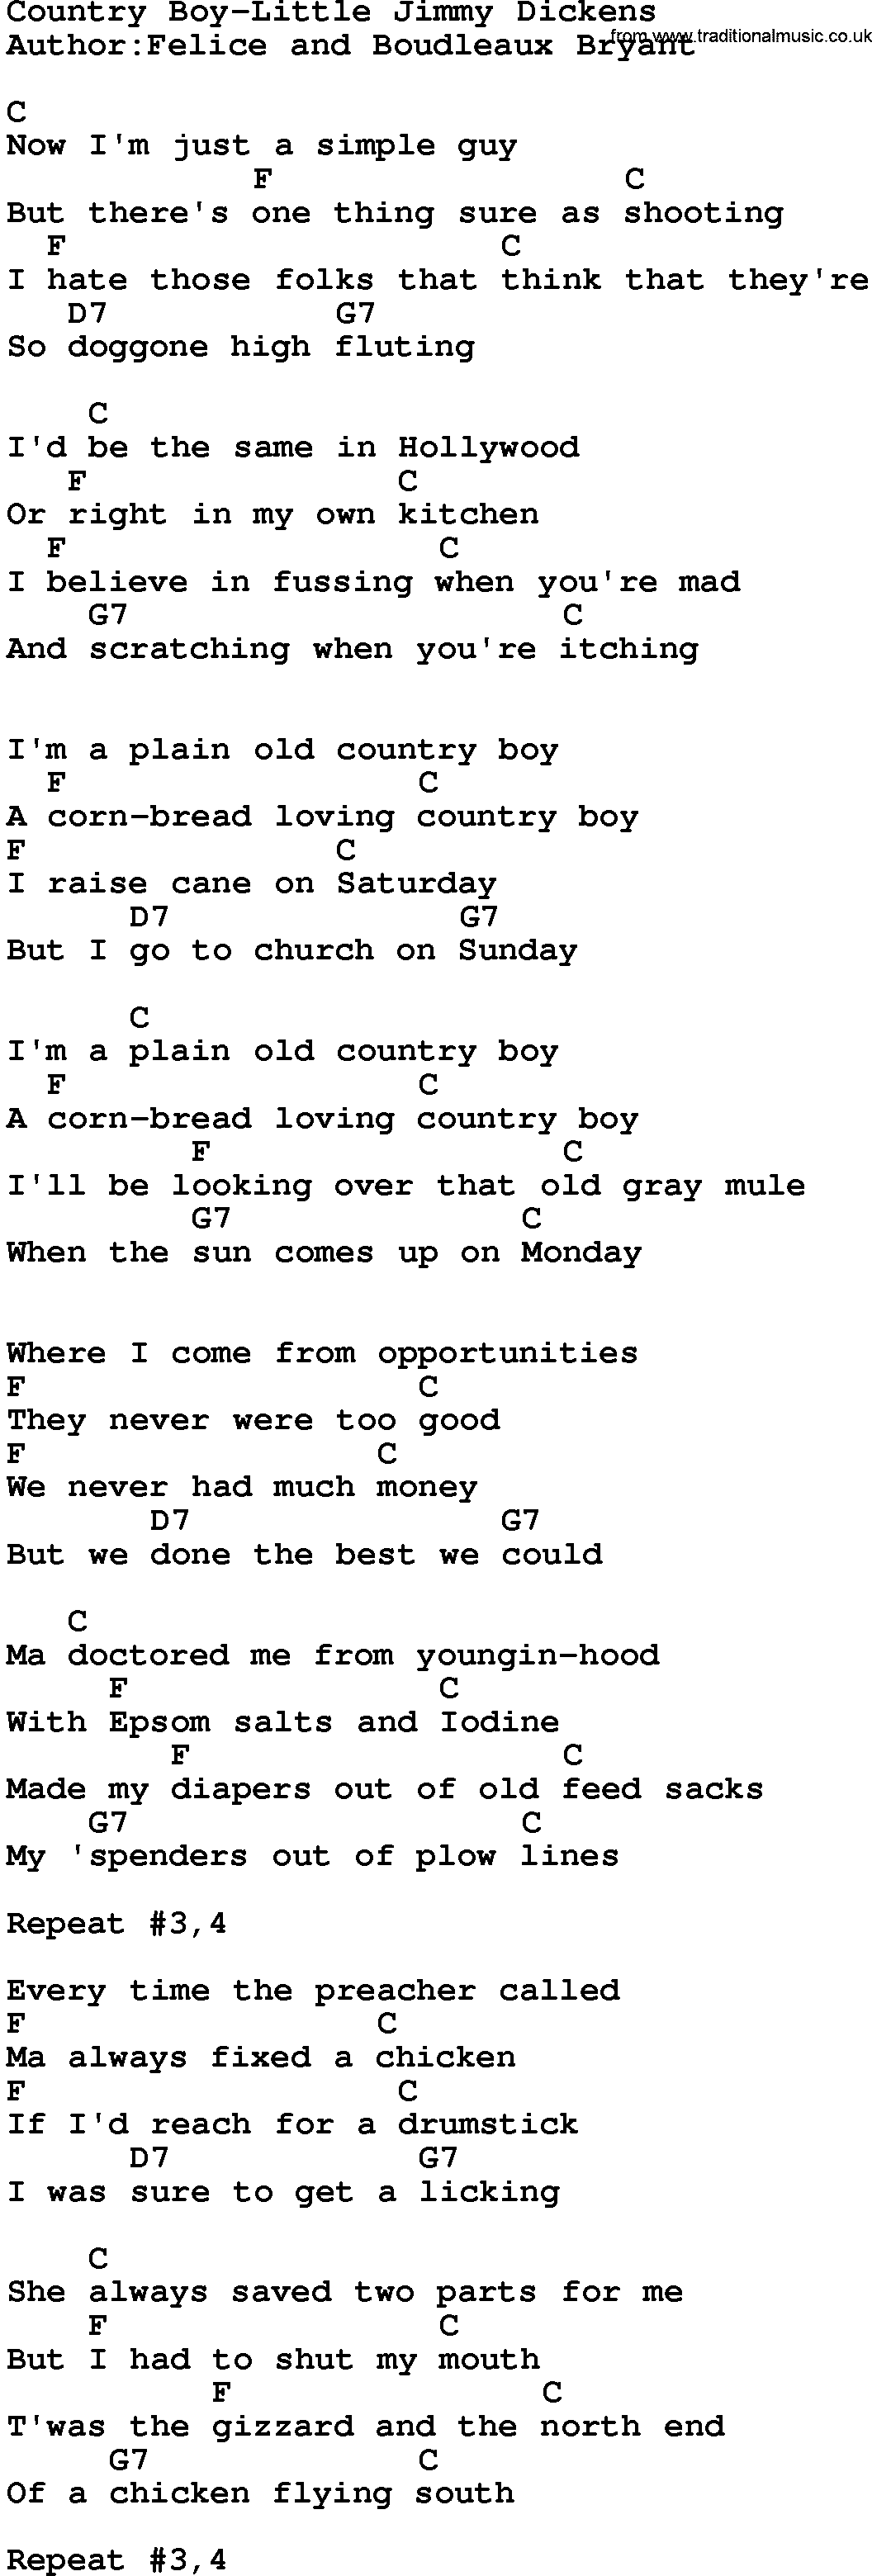 Country music song: Country Boy-Little Jimmy Dickens lyrics and chords